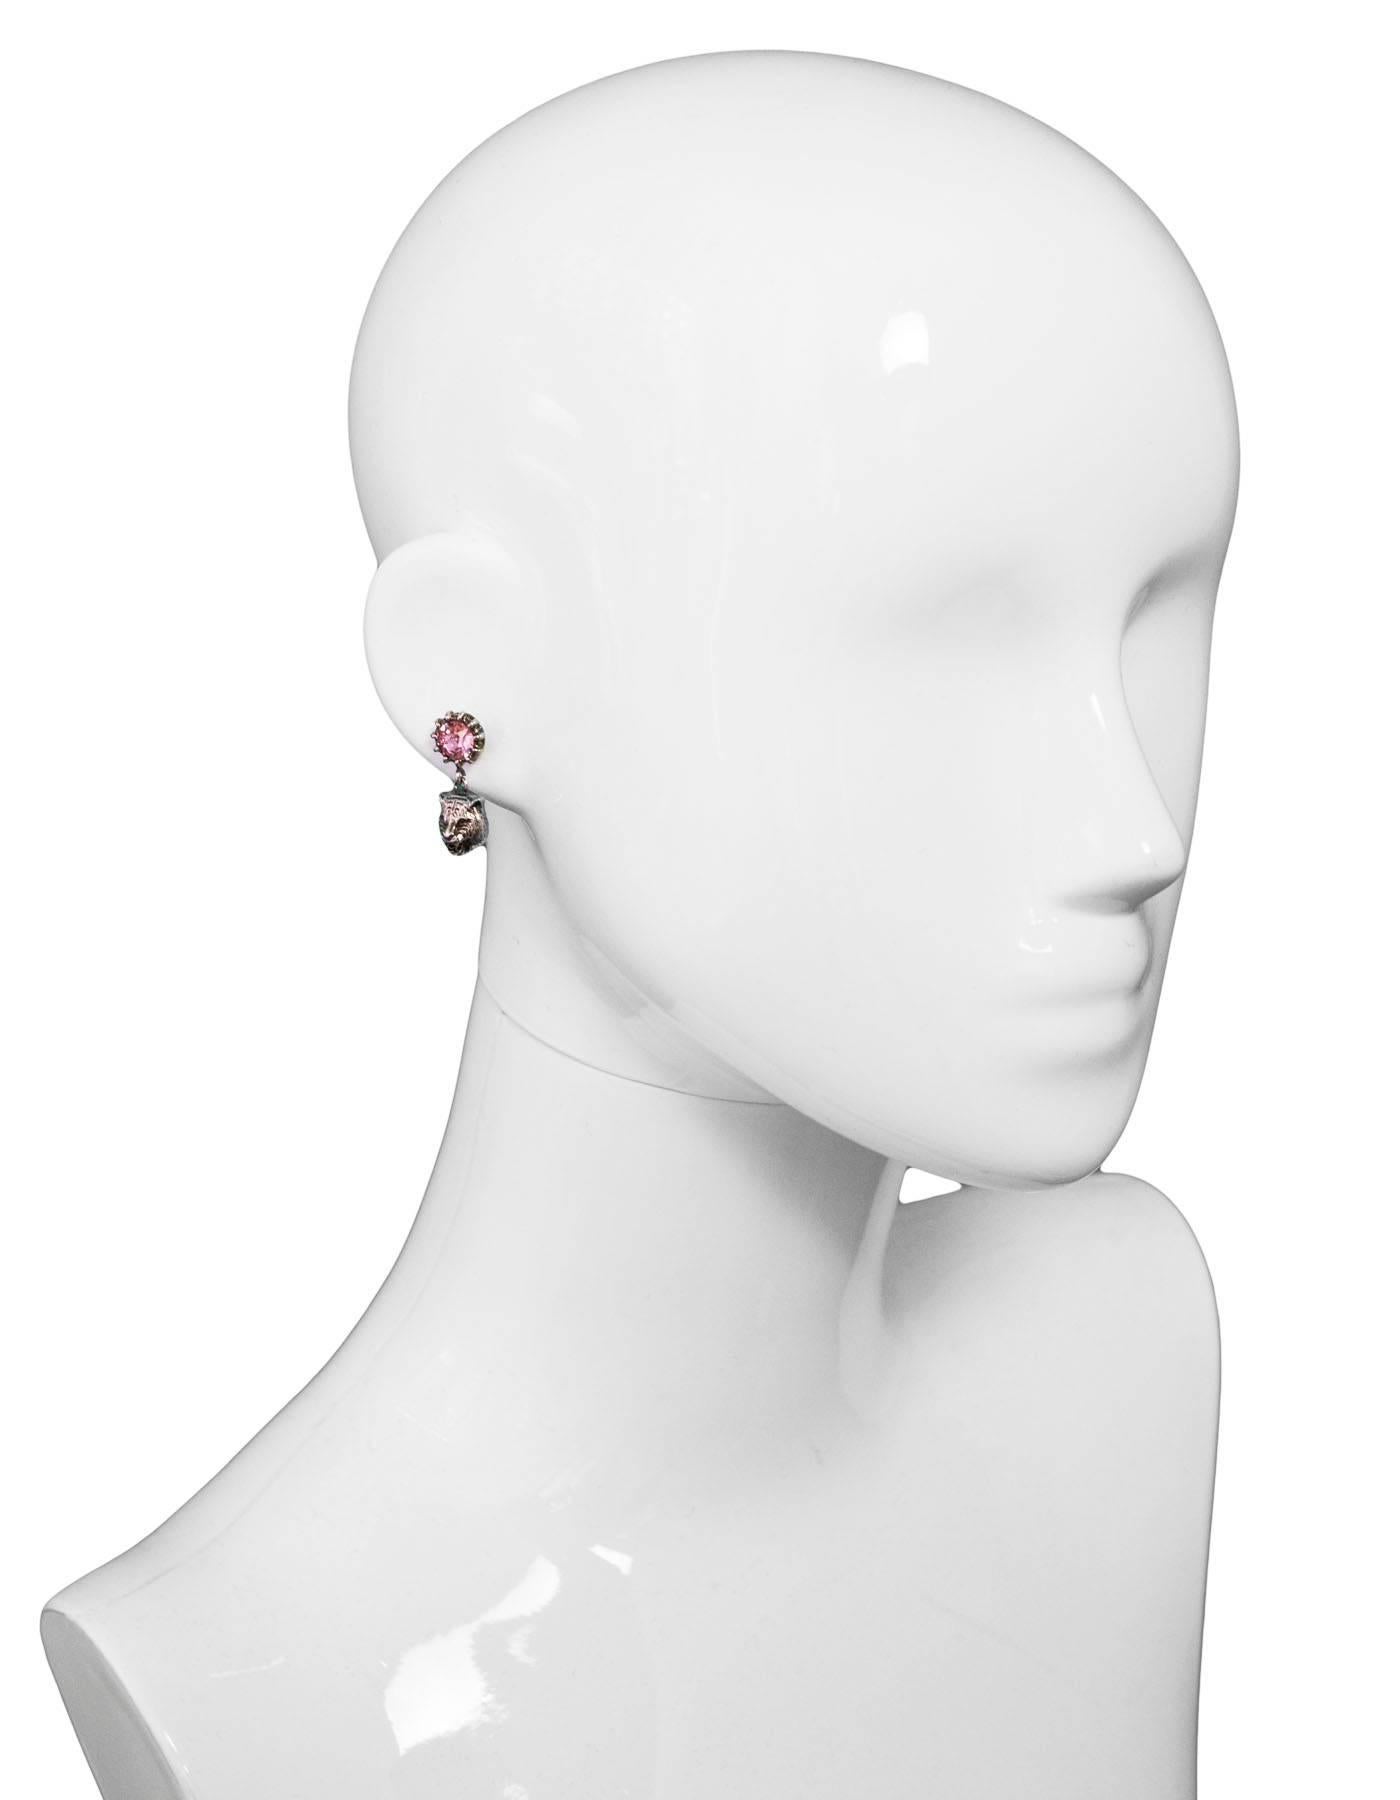 Gucci Pink Crystal Stud Earrings with Feline Head

Made In: Italy
Color: Silver, pink
Hardware: Silvertone
Materials: Metal, crystal
Closure: Pierced back
Retail Price: $330 + tax
Overall Condition: Excellent pre-owned condition
Included: Gucci